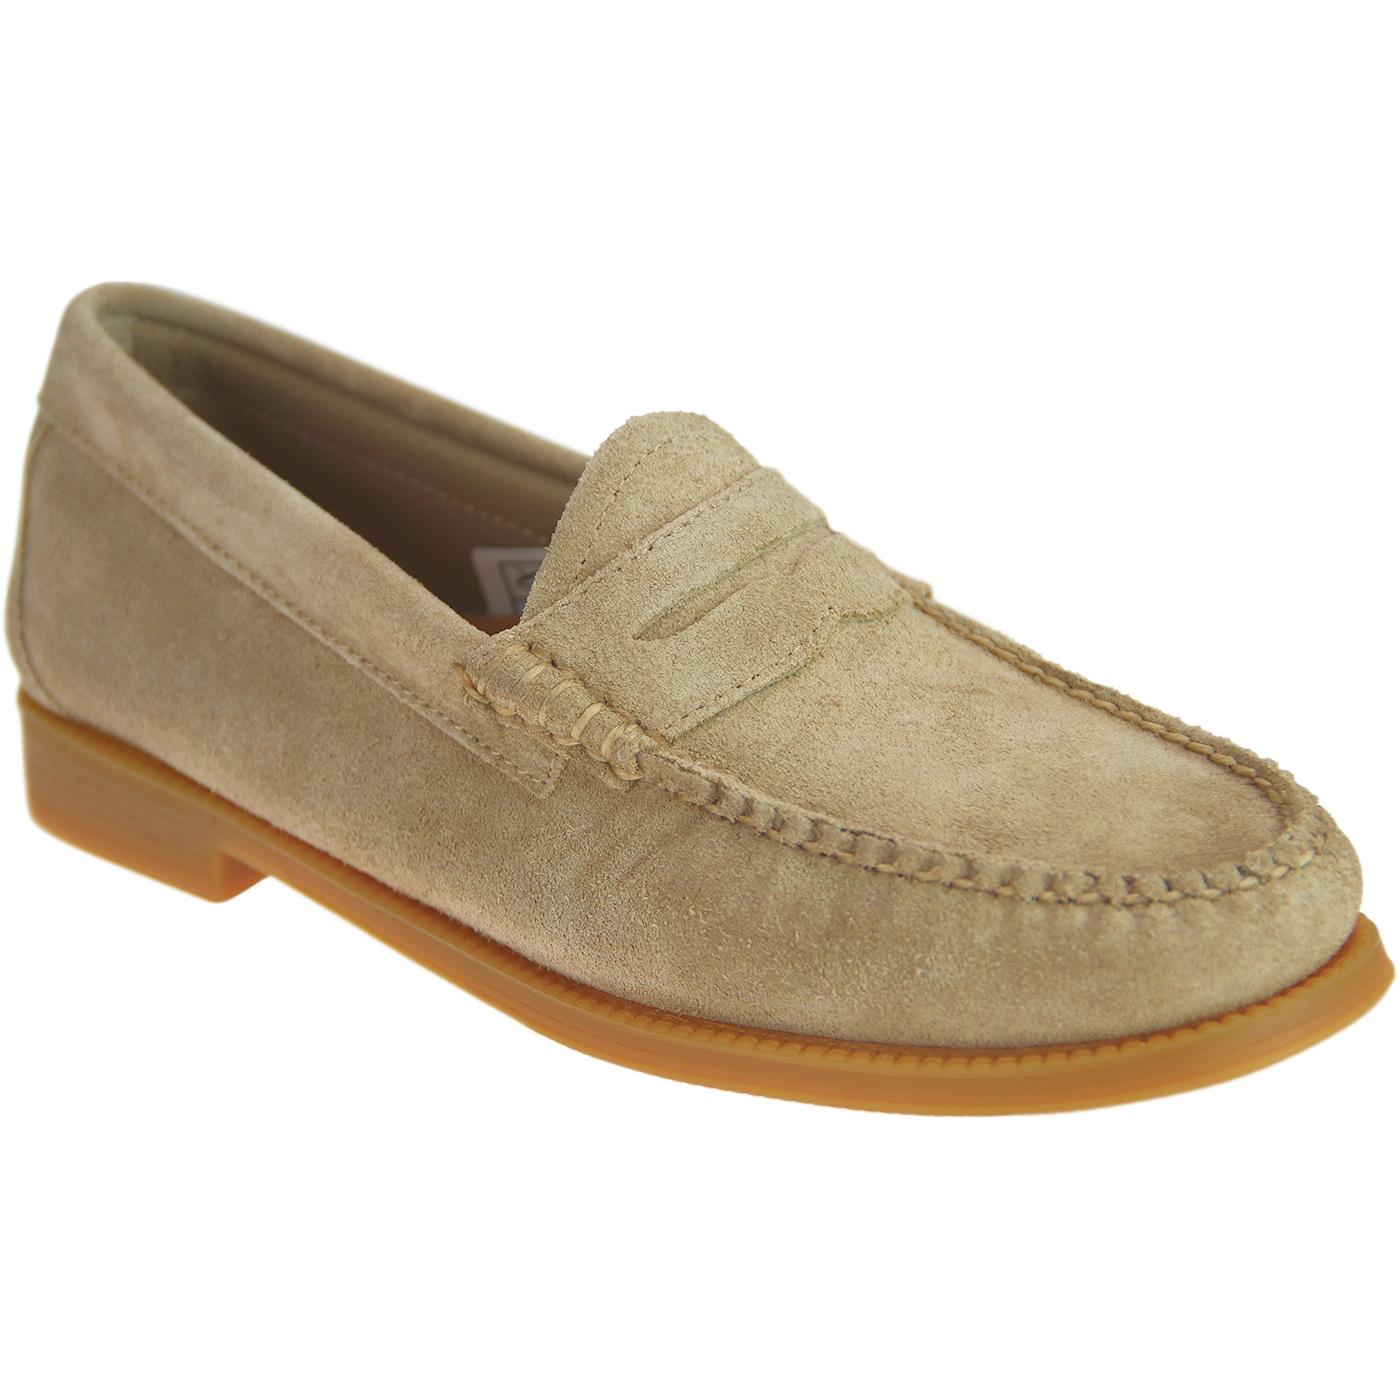 BASS WEEJUNS Women's Retro Suede Penny loafers in Earth